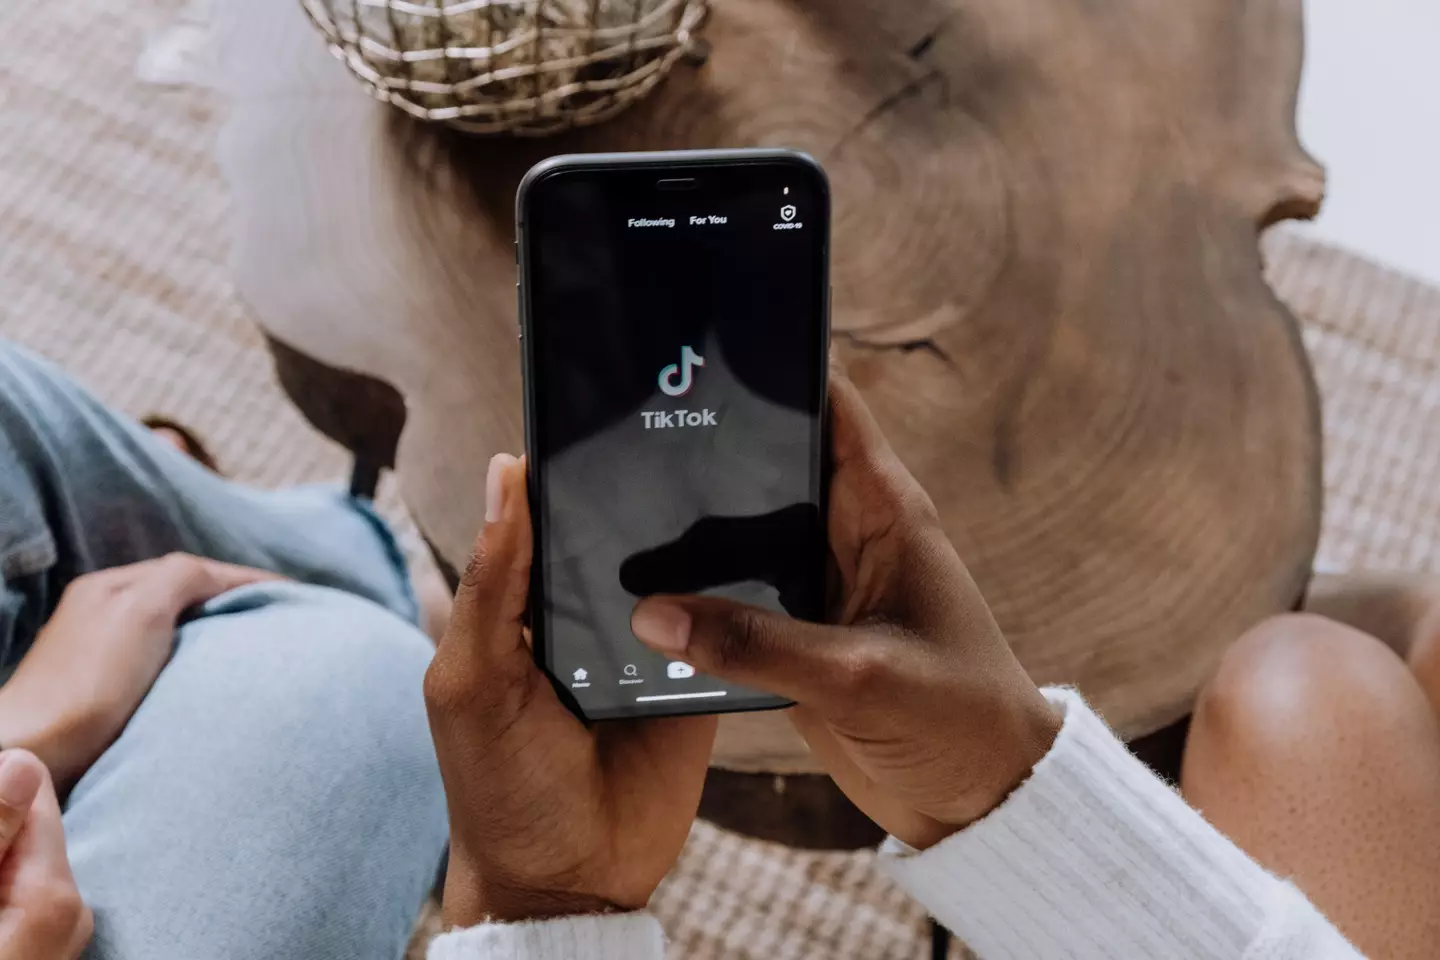 A company is on the hunt for three professional TikTok watchers.